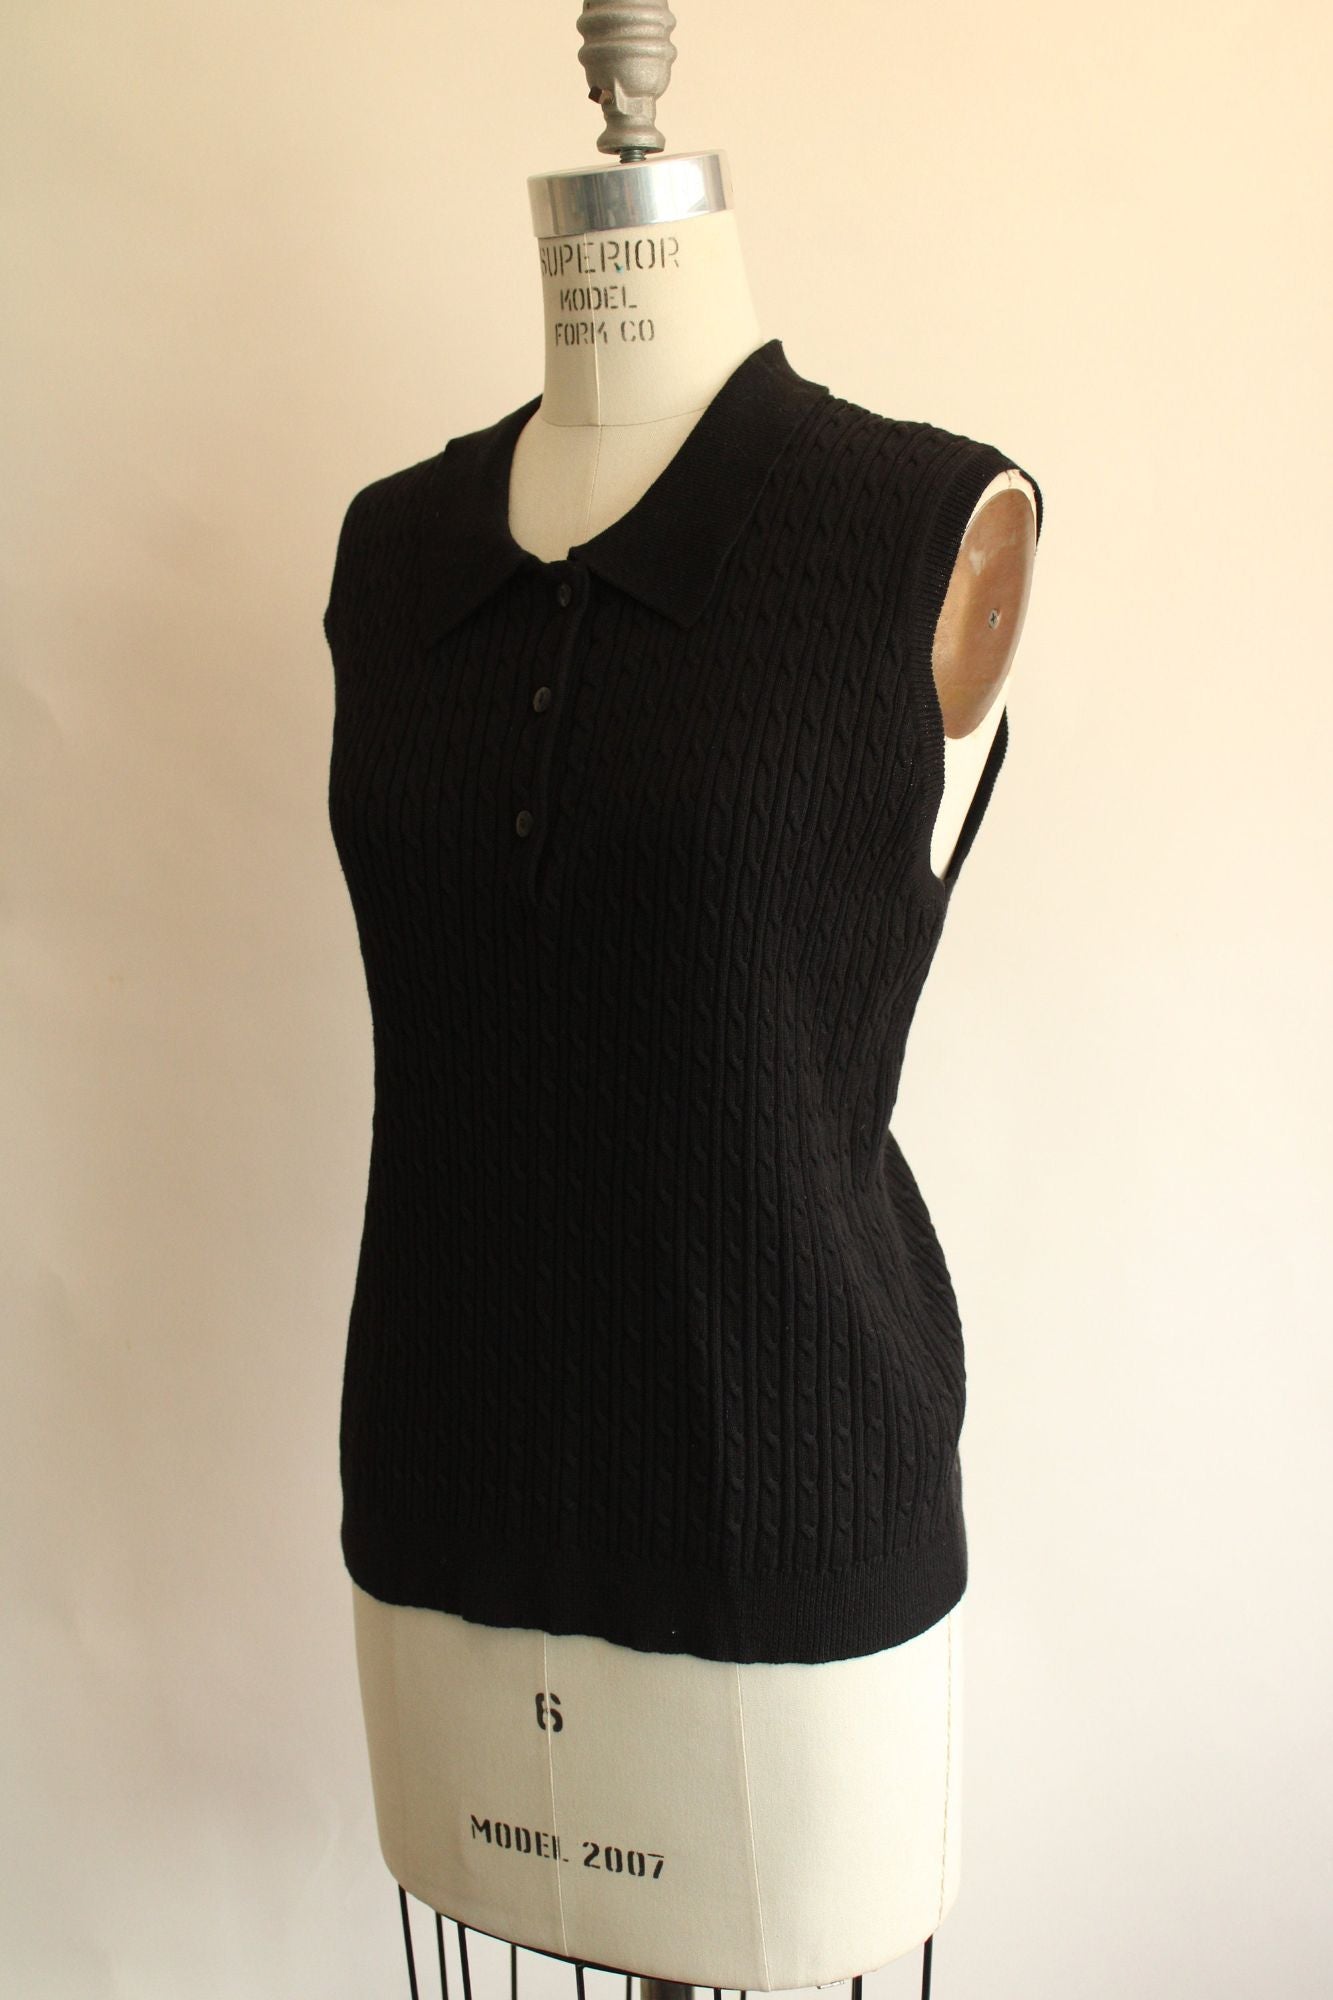 Vintage 2000s NWT Mervyn's Black Sleeveless Knit Top with Buttons